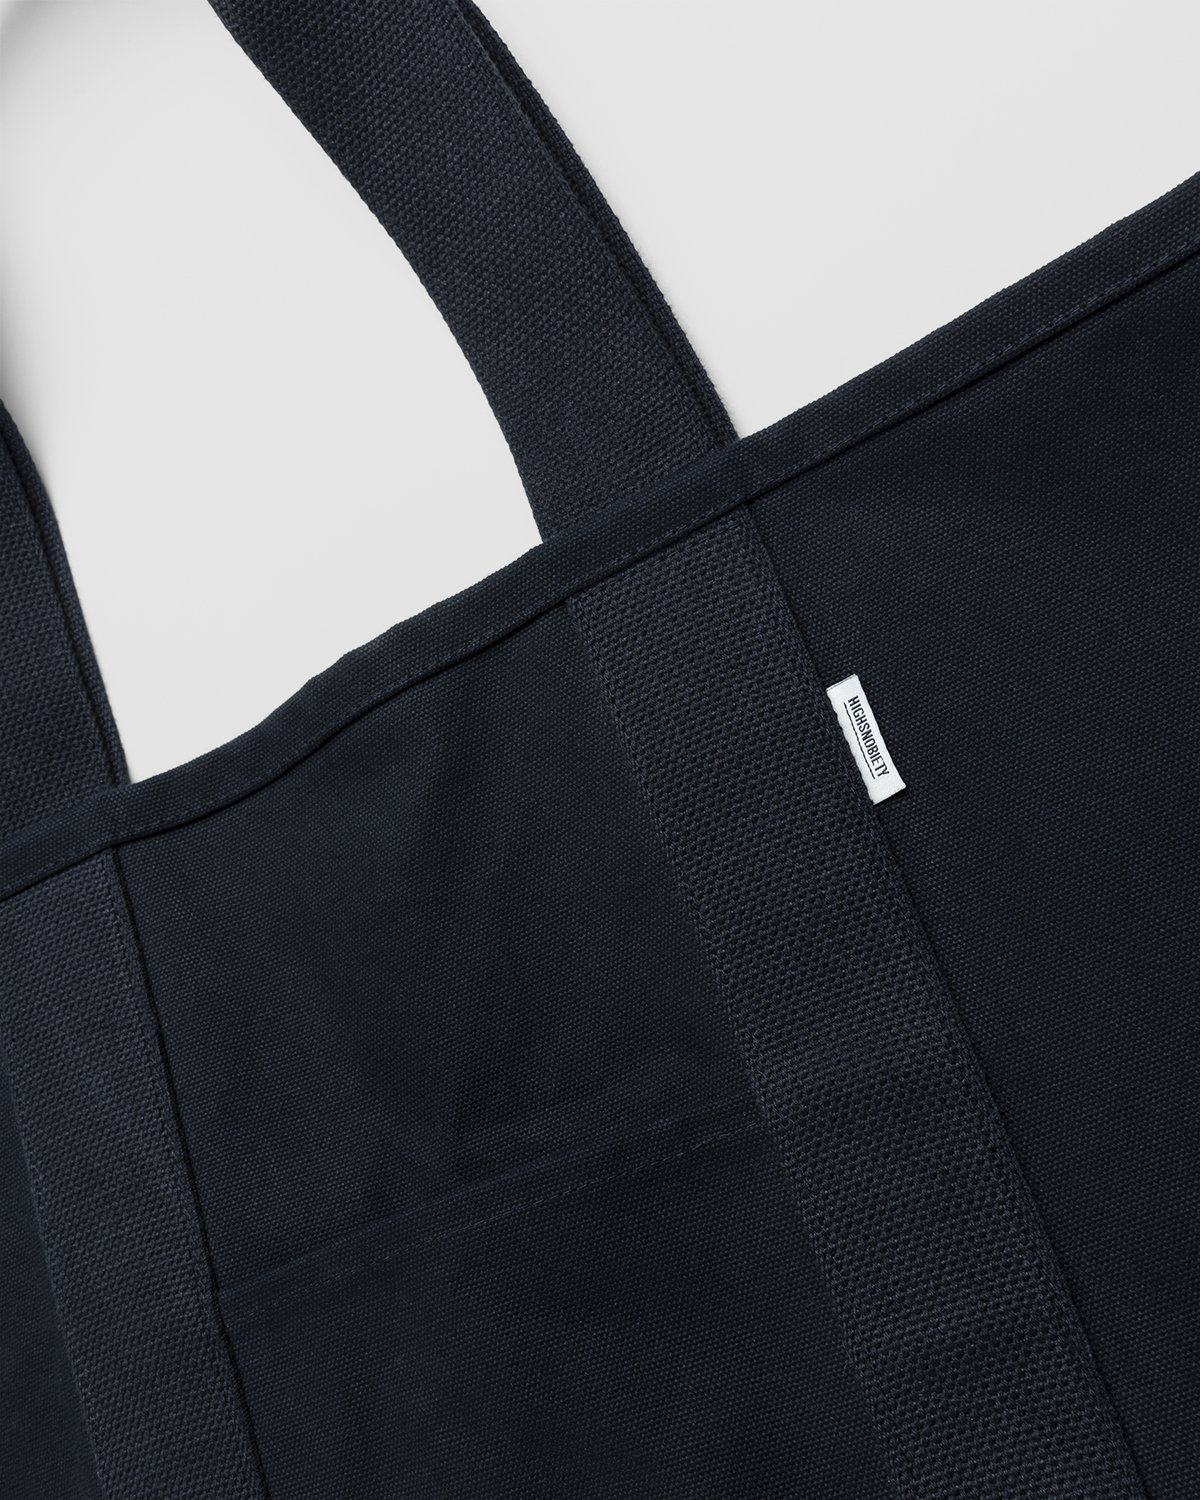 Highsnobiety - Heavy Canvas Large Shopper Tote Black - Accessories - Black - Image 4